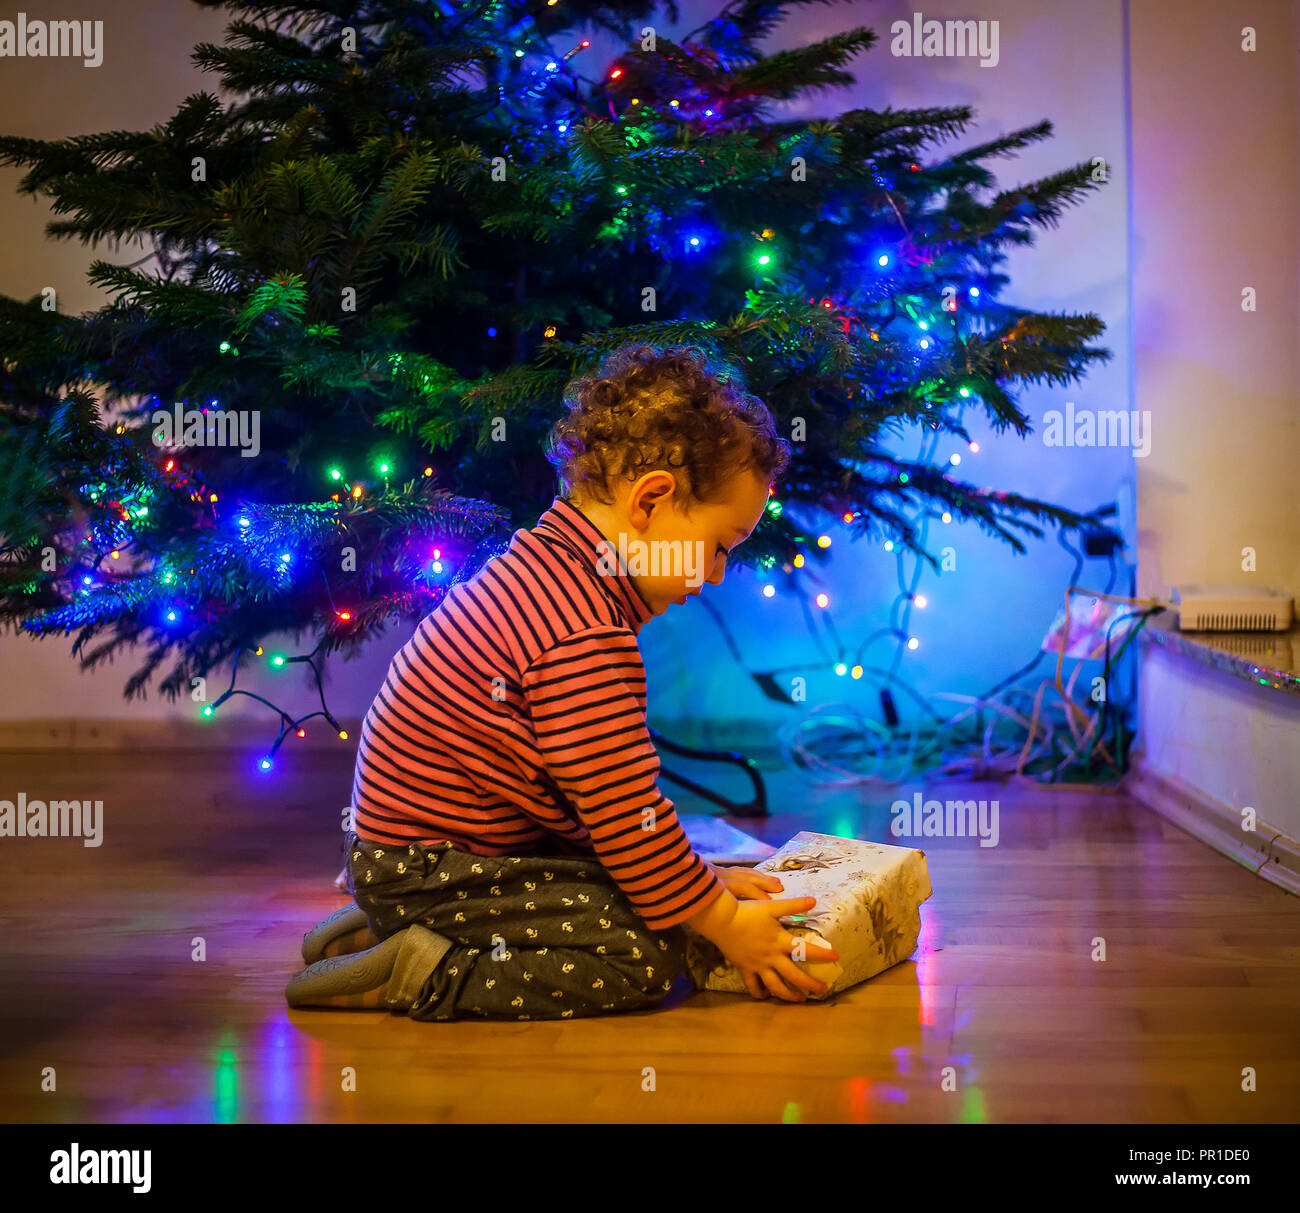 Cute toddler opens gifts on the floor near the Christmas tree (evening mystery lighing) Stock Photo